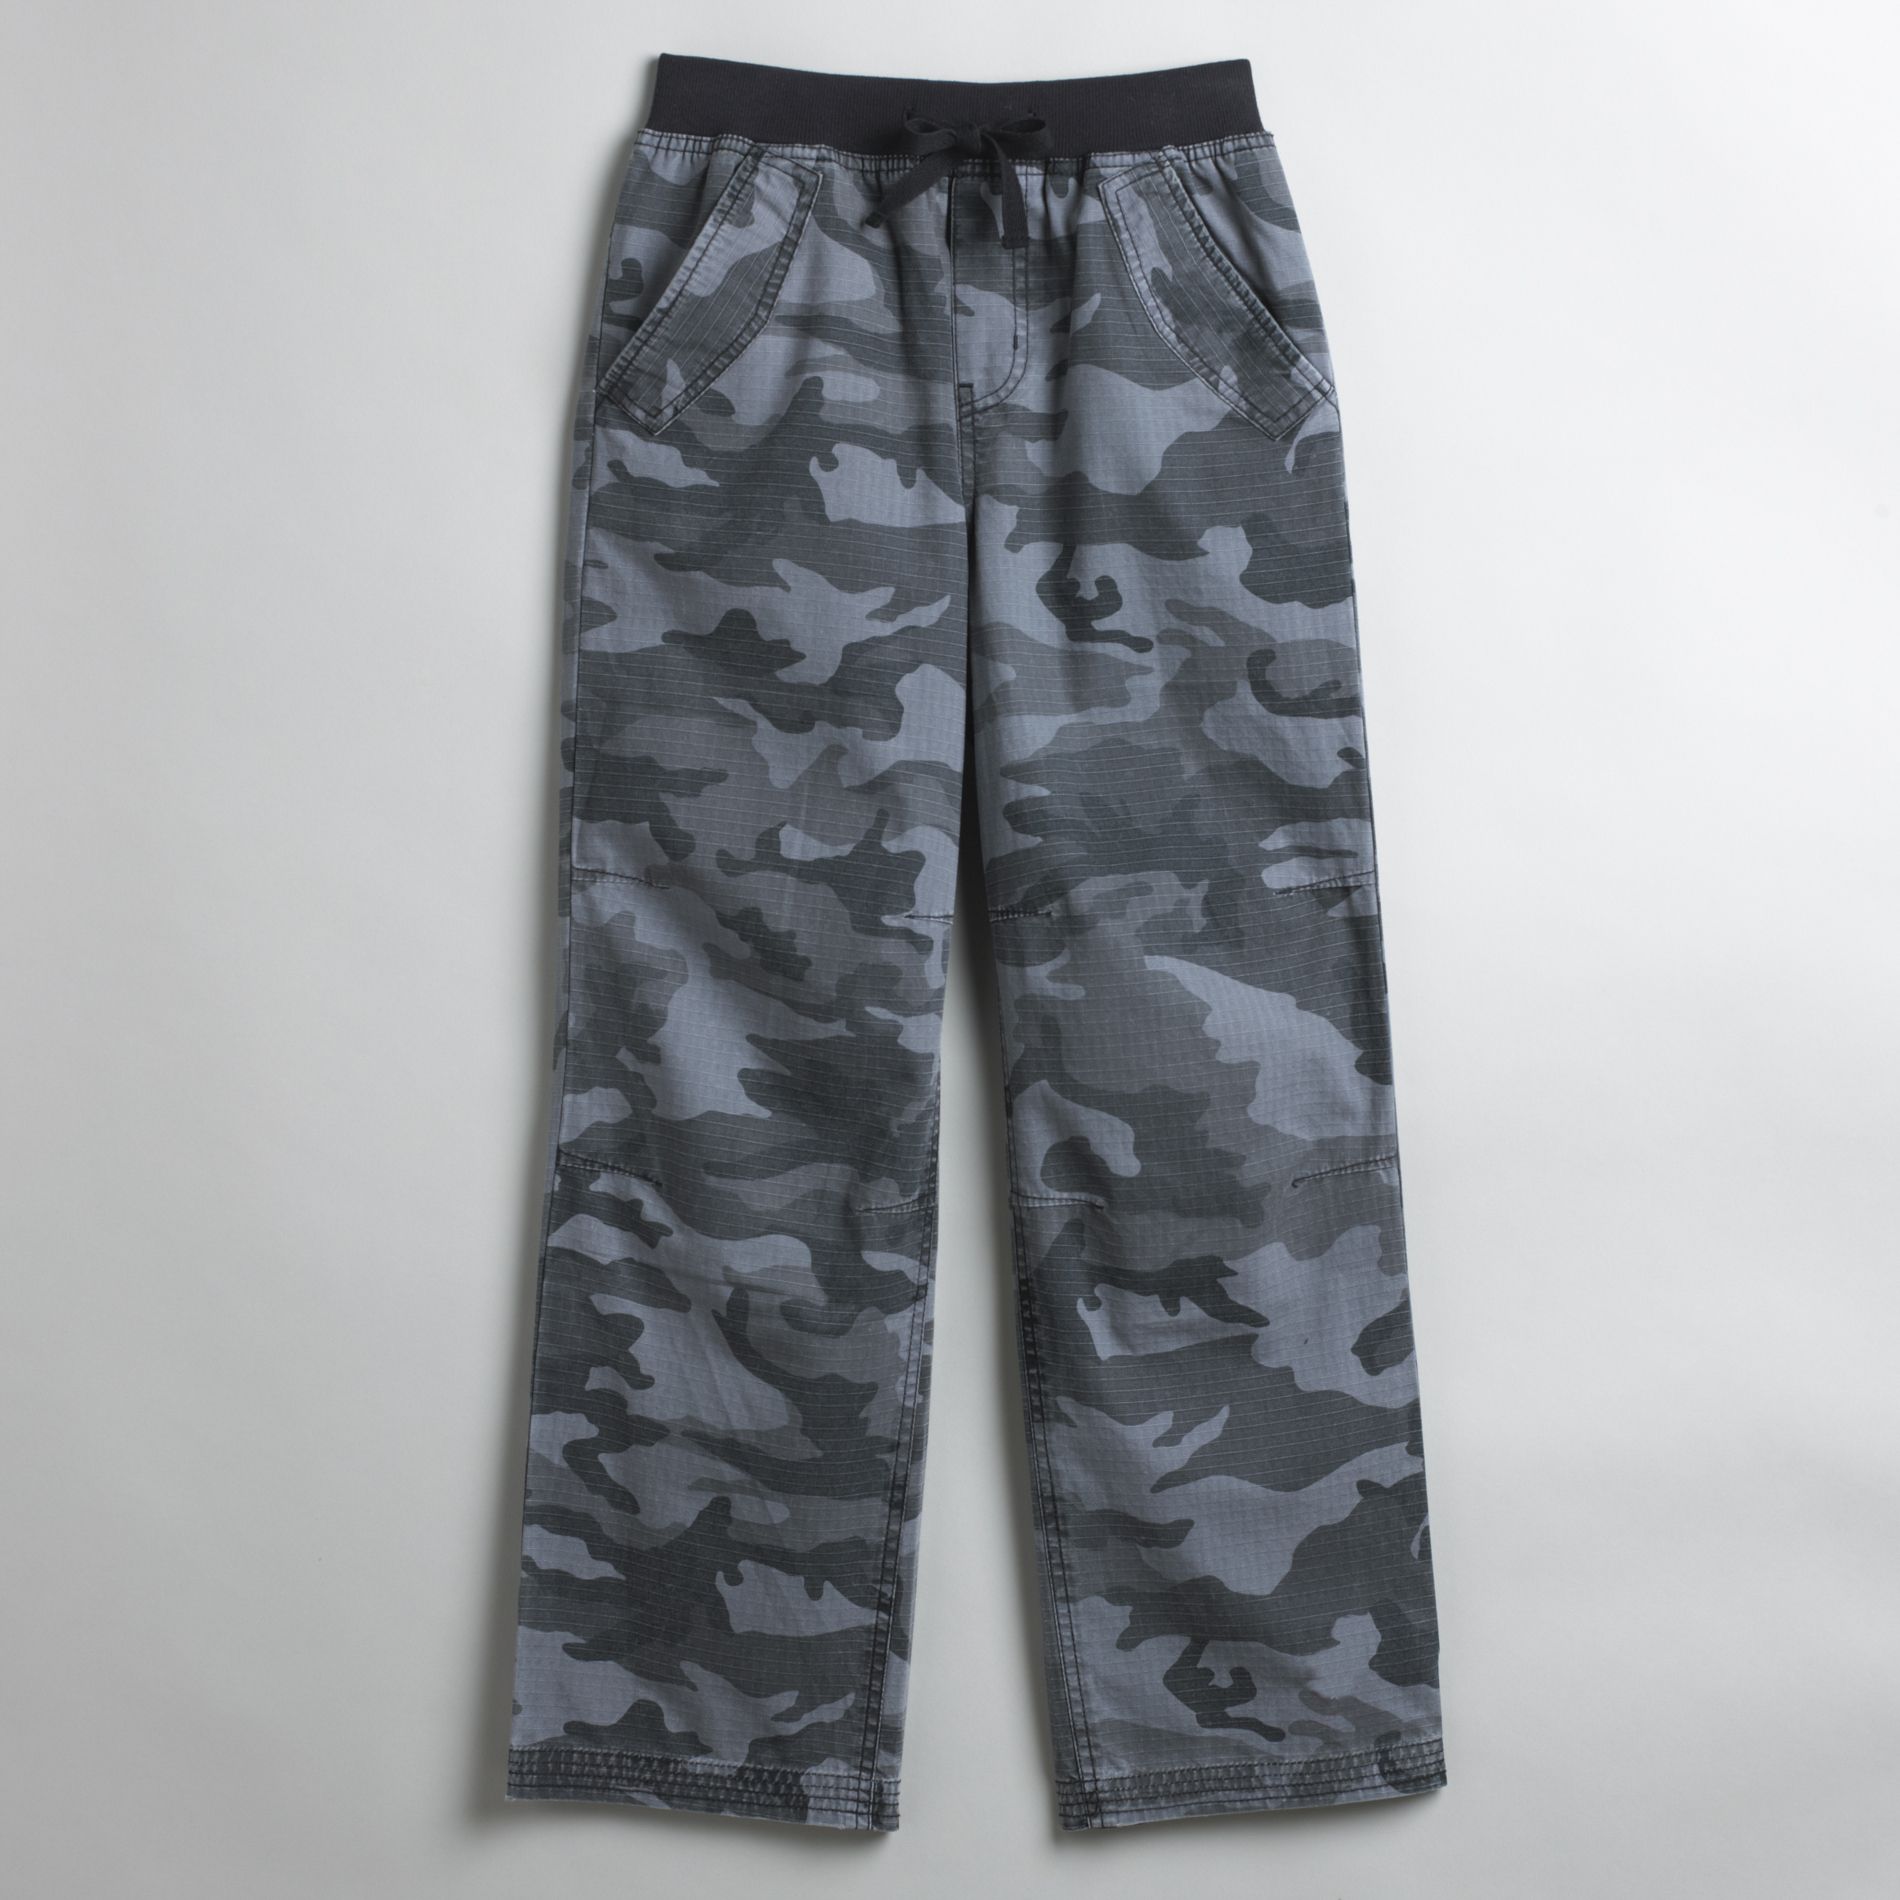 Basic Editions Boy's Ripstop Camo Pull-on Pants